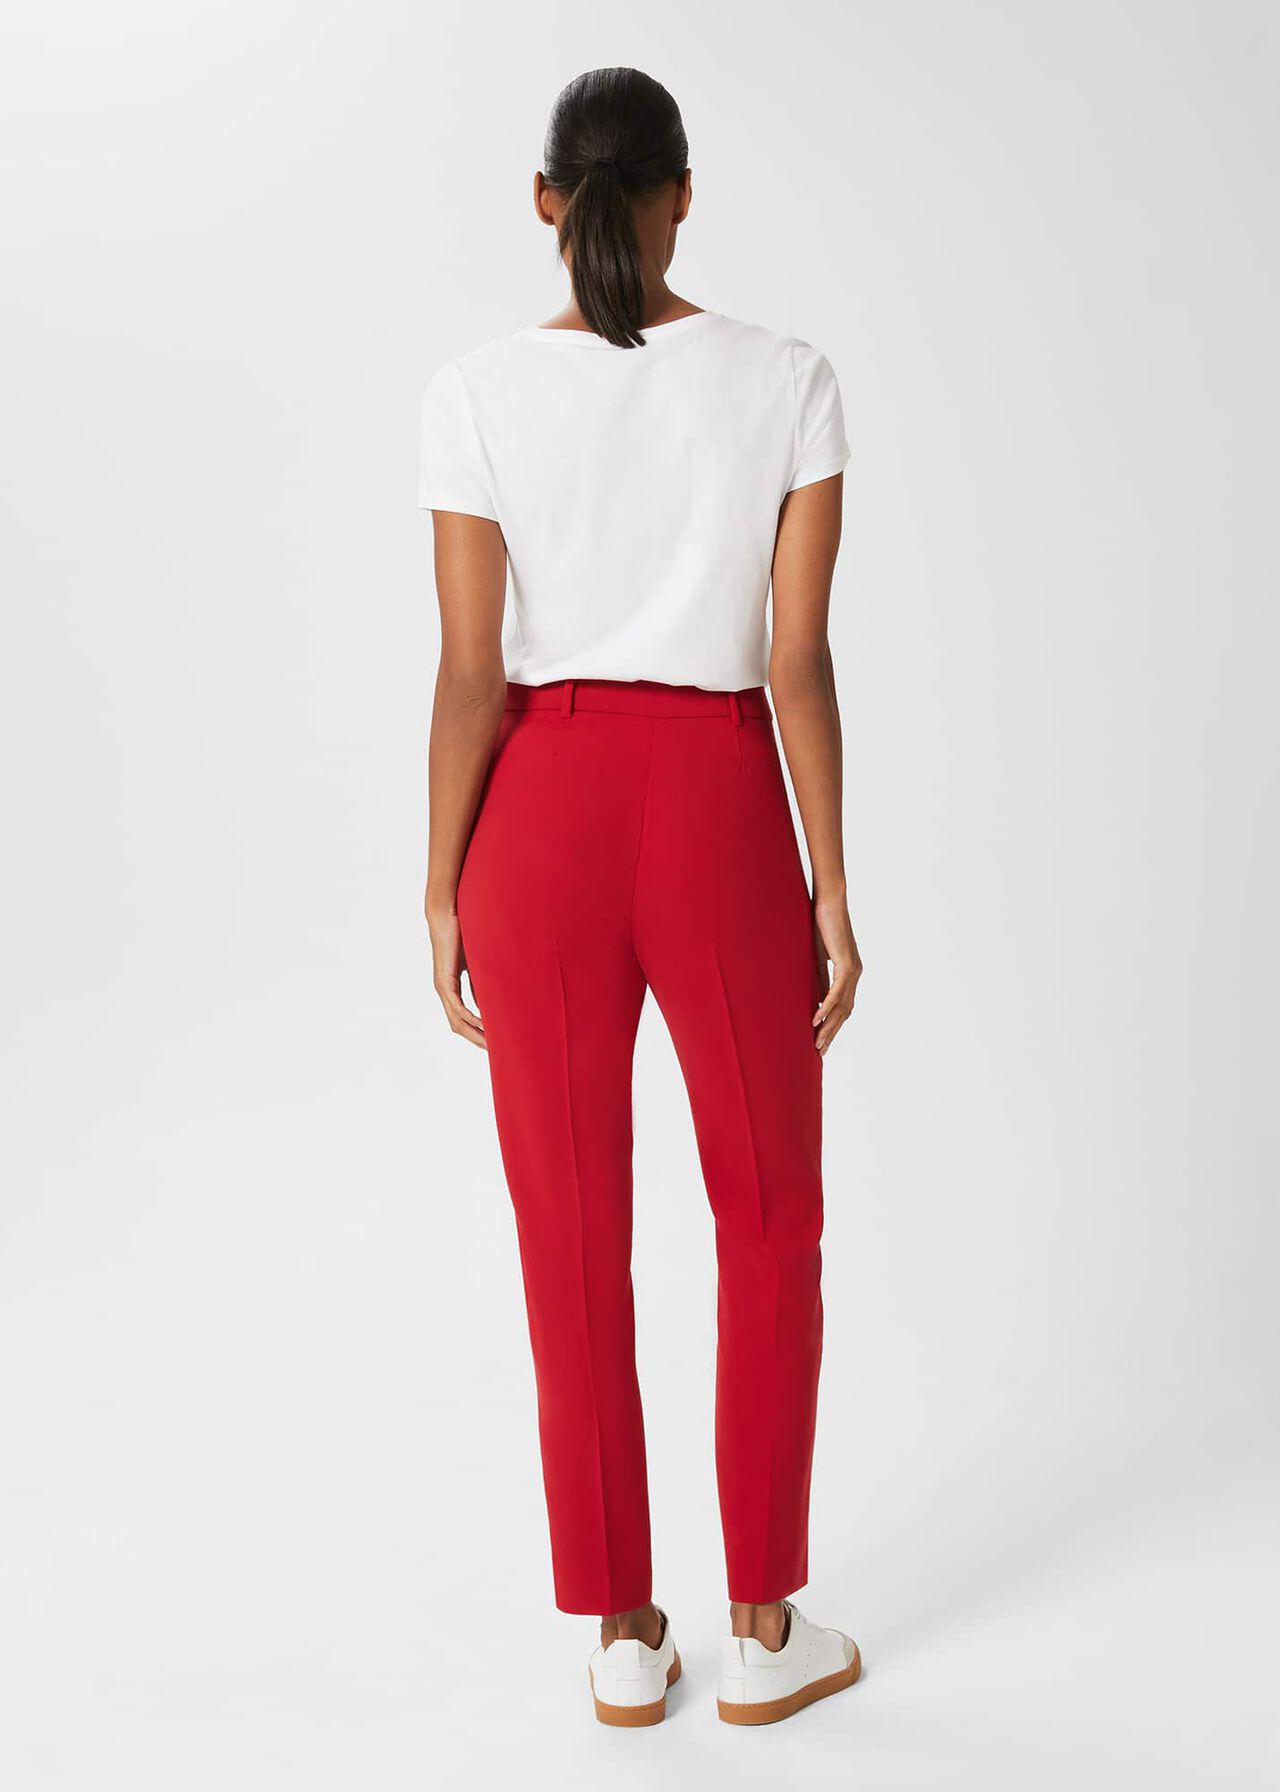 Adelia Trousers, Red, hi-res